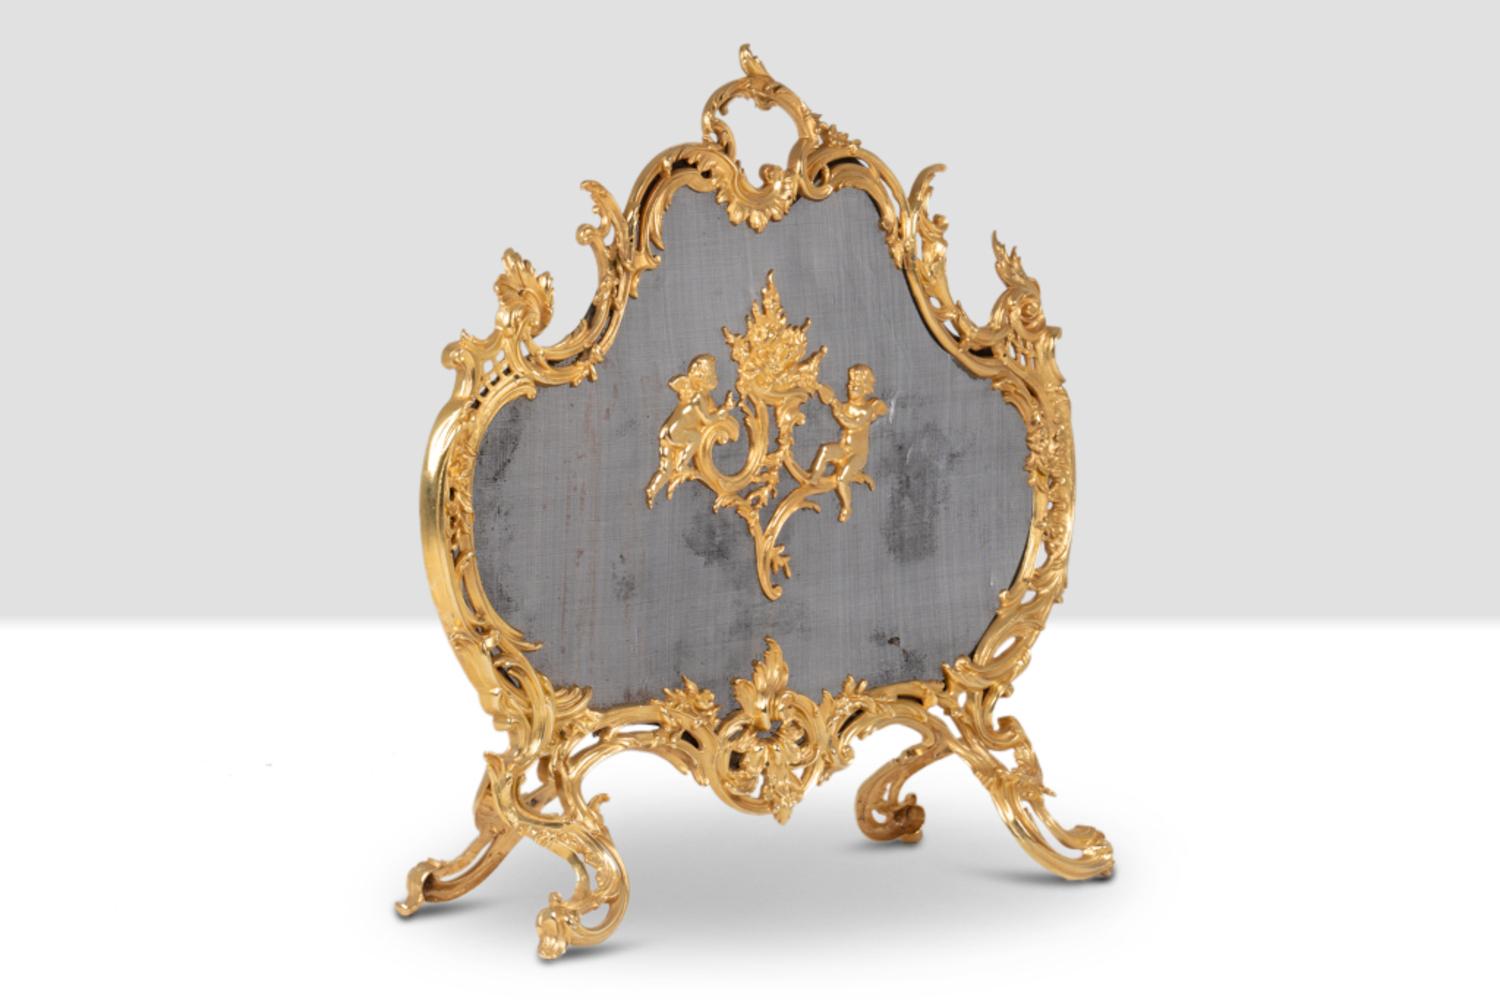 Gilt bronze fire screen with scalloped shape and rocaille decoration of plants, acanthus leaves, shells and foliage. Decorated with cherubs in the central part, standing turned near stylized flames.

French work realized circa 1880.

Reference: